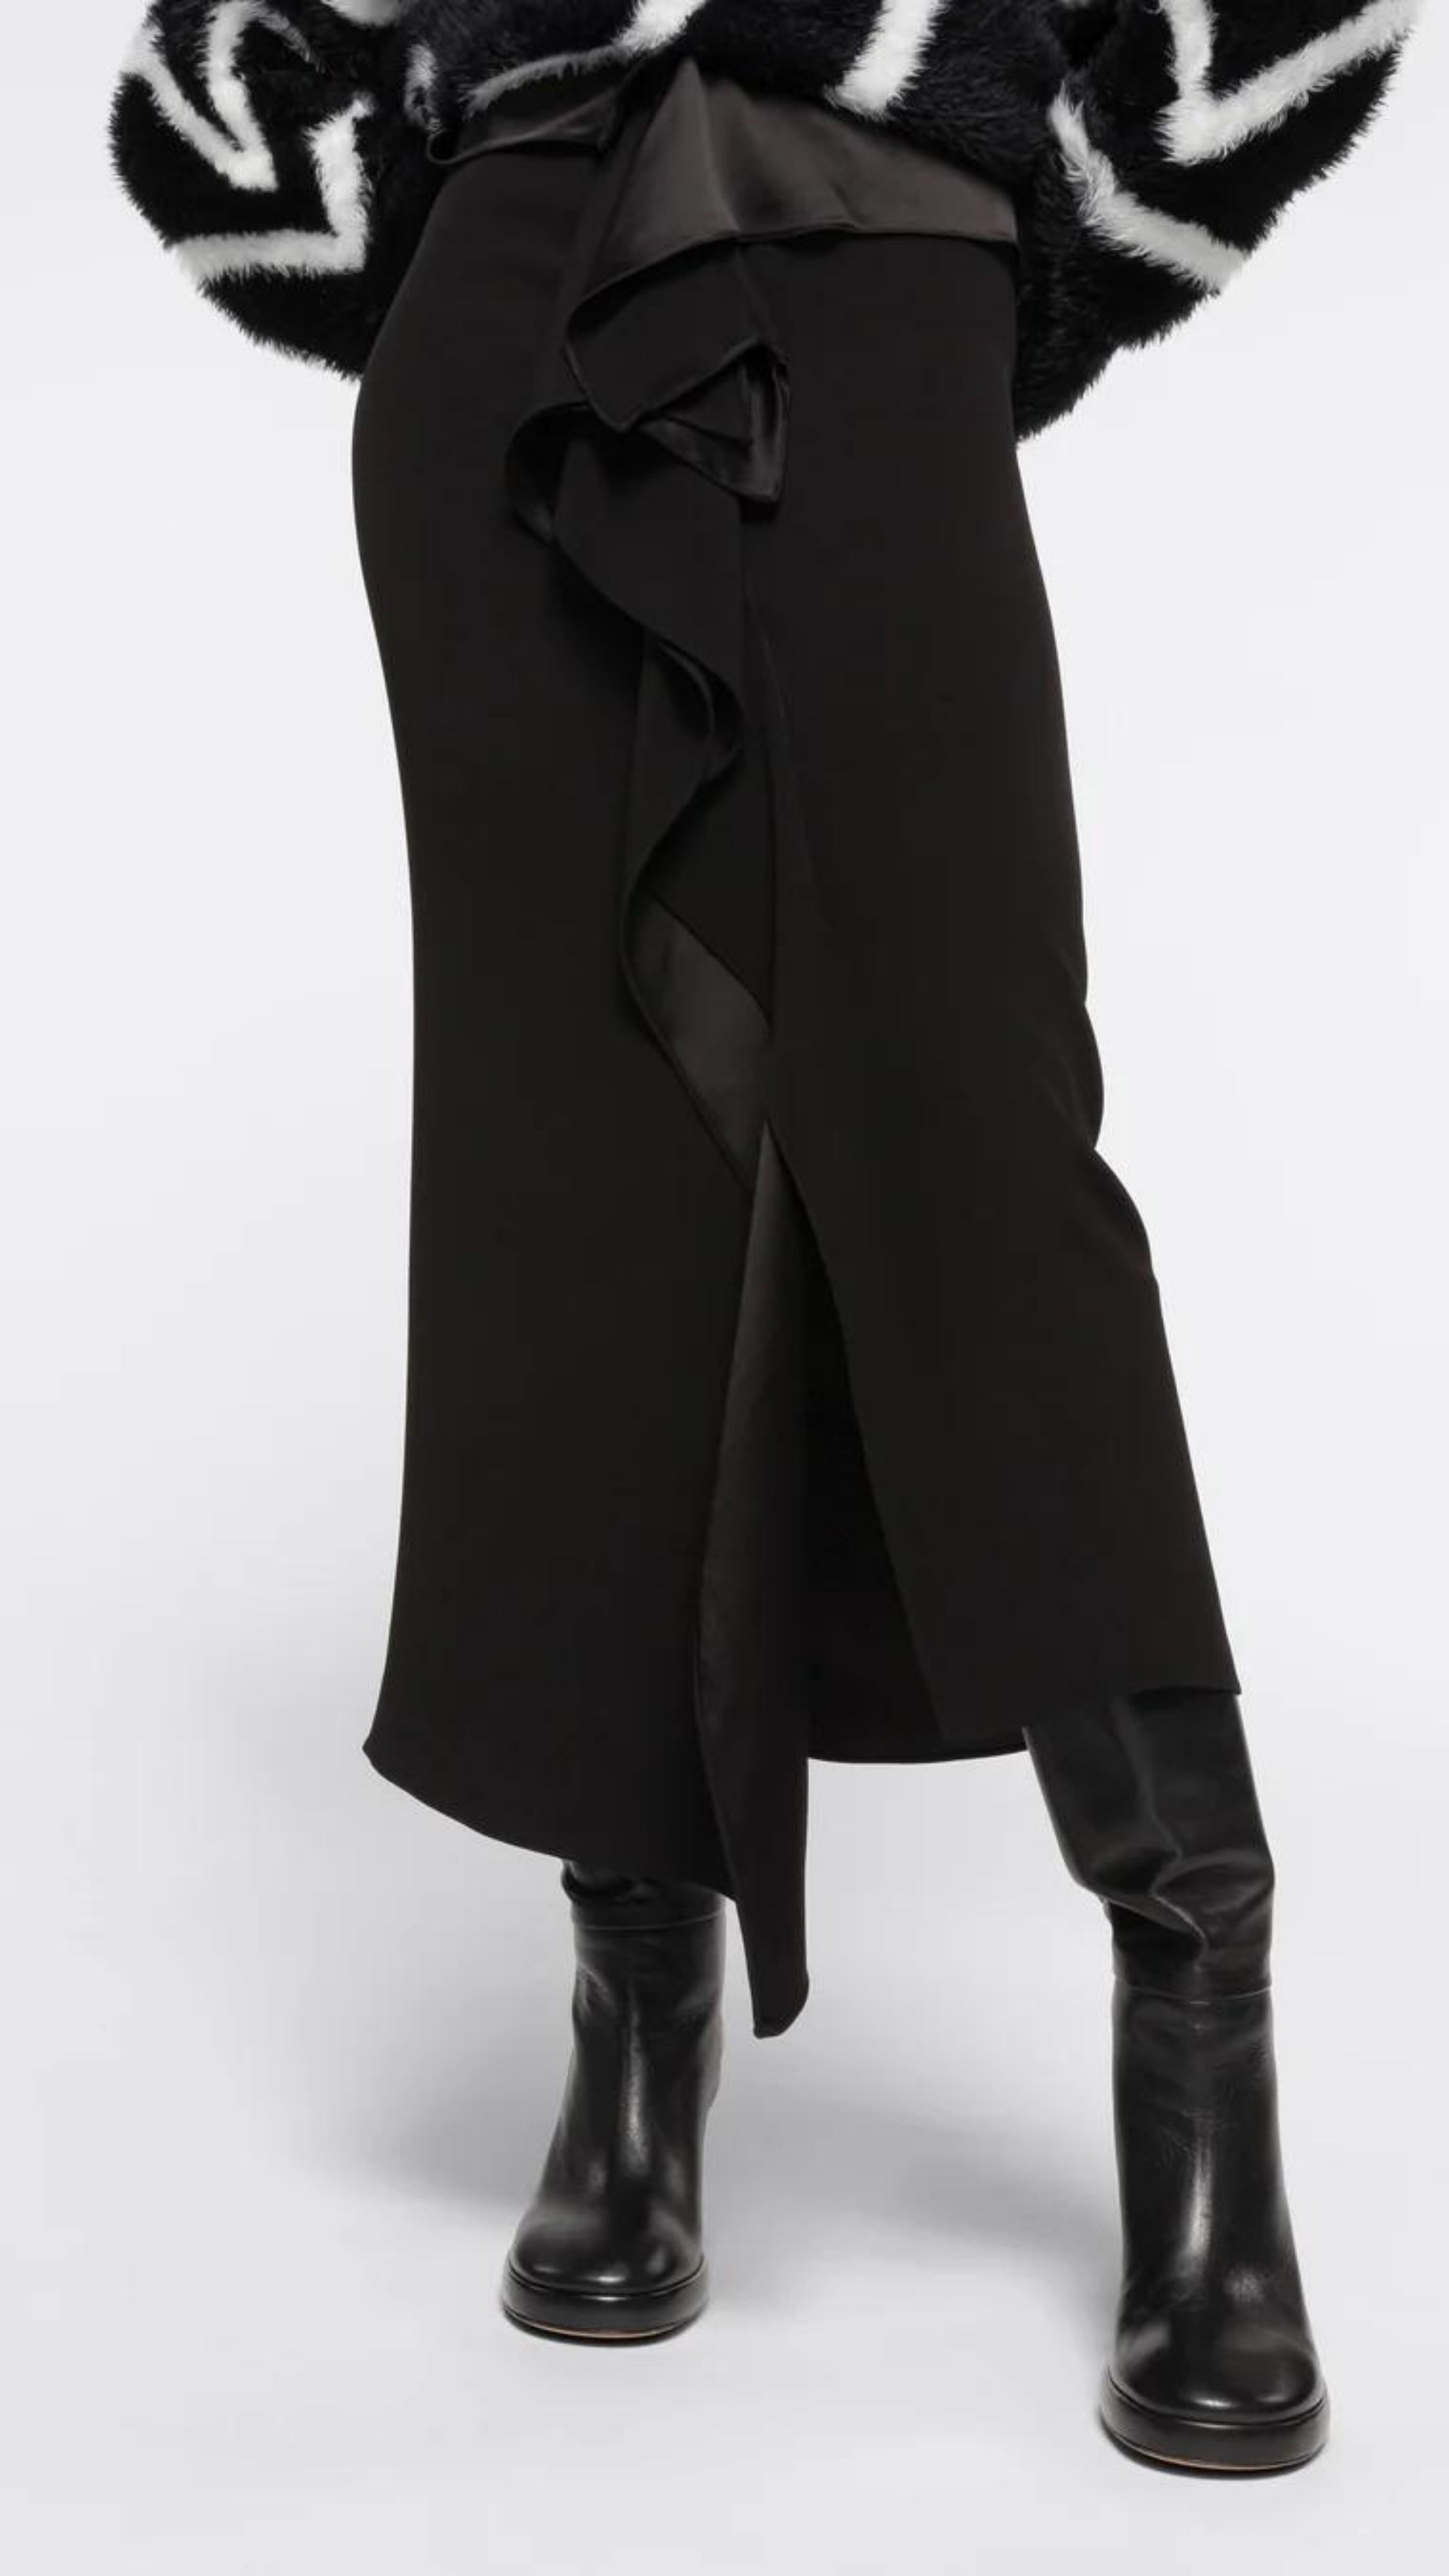 AZ Factory Colville Molly Molloy Lucinda Chambers, Ruffled Crepe Skirt in Black A sleek midi length skirt crafted from a mix of crepe and satin, complemented by a fold-over belt and delicate ruffling along the front panel. Shown from the front view on model.